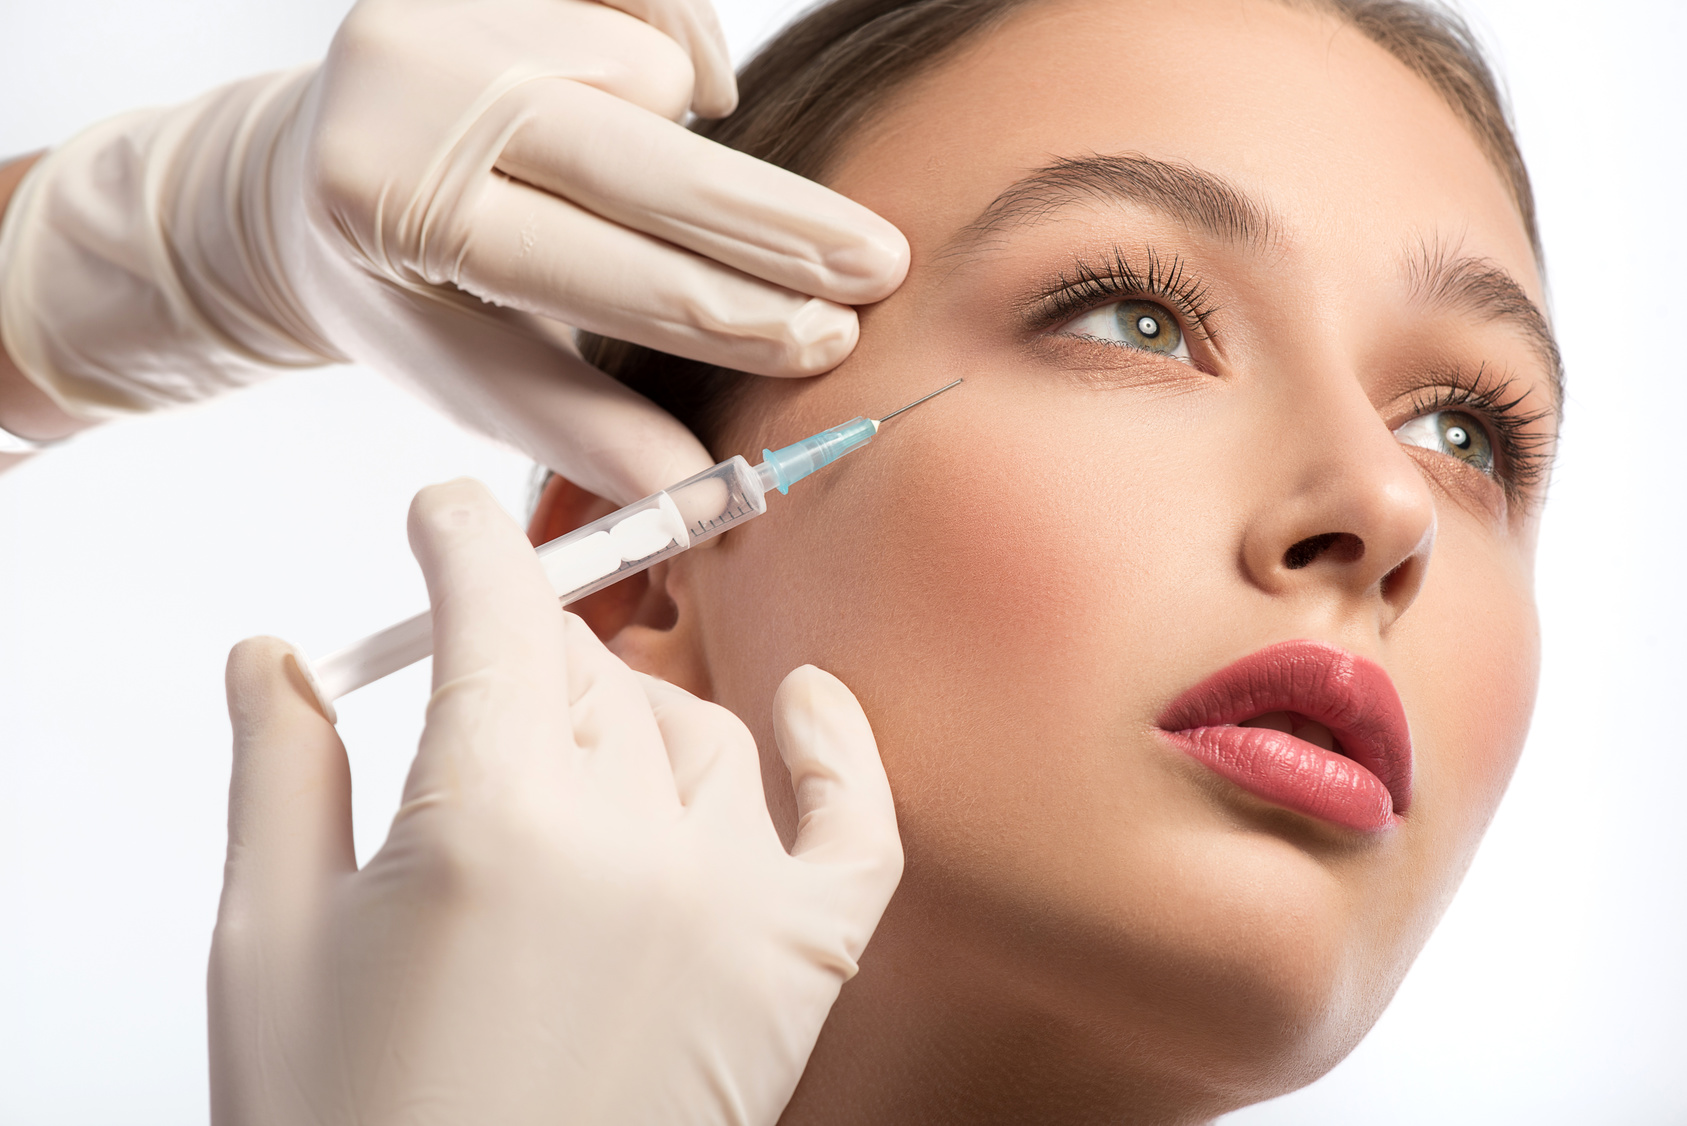 Serine young woman is getting facial botox injection. Beautician hands in gloves holding syringe near her face